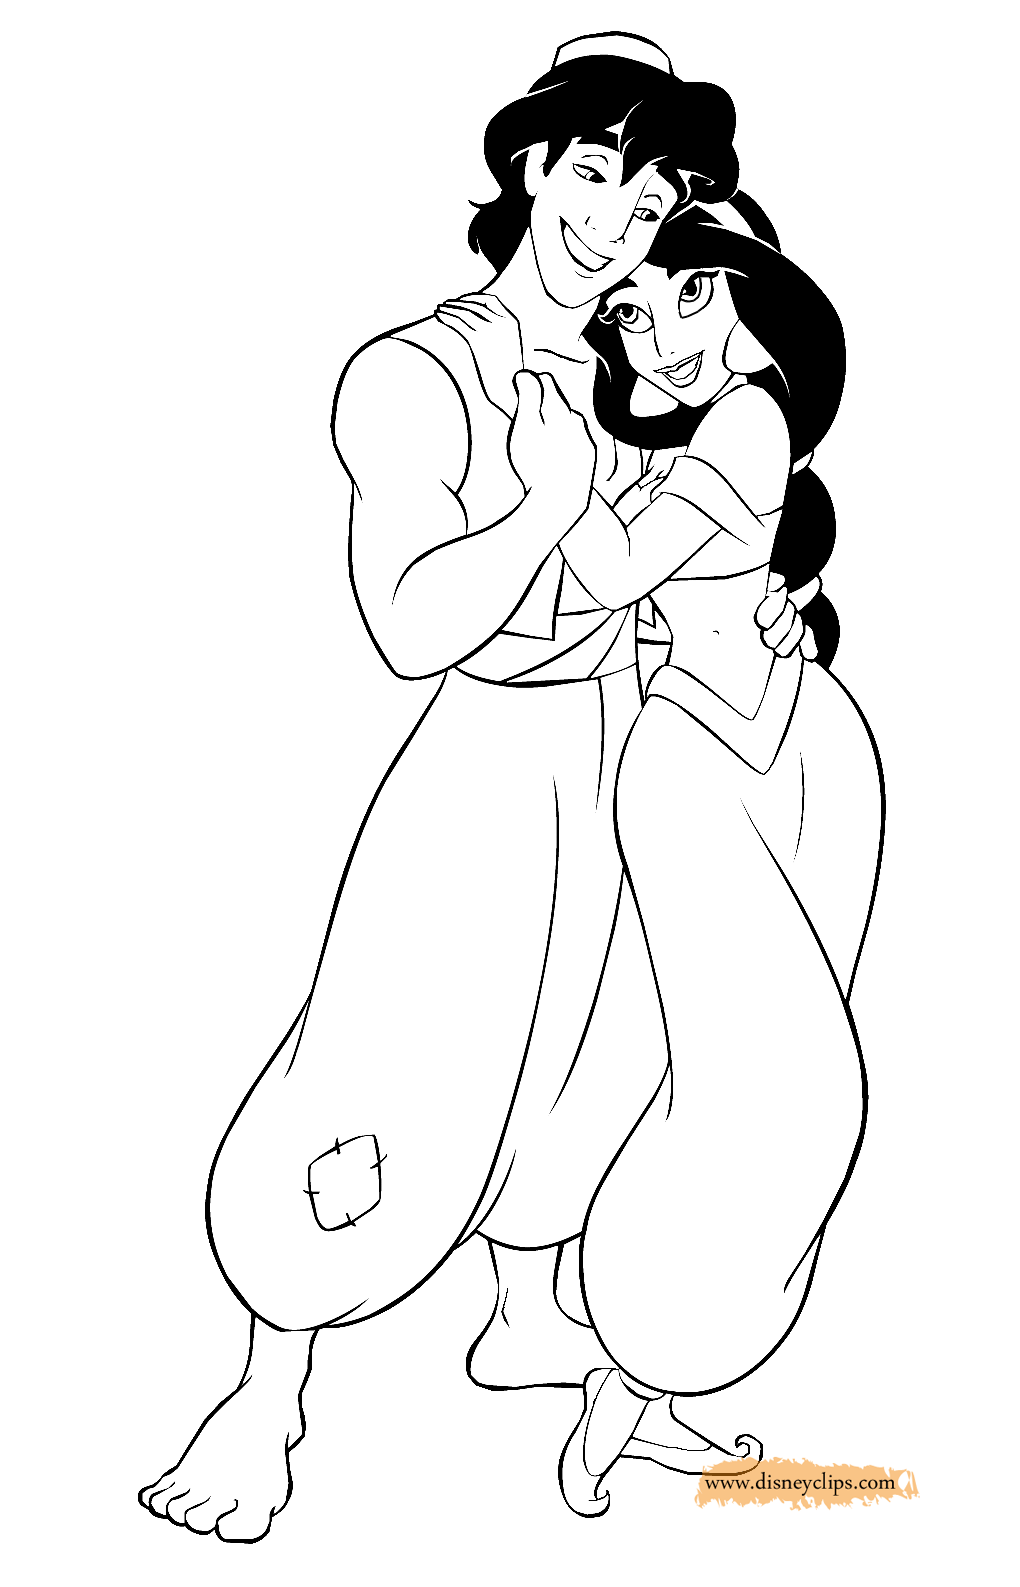 Aladdin And Jasmine - Coloring Pages for Kids and for Adults